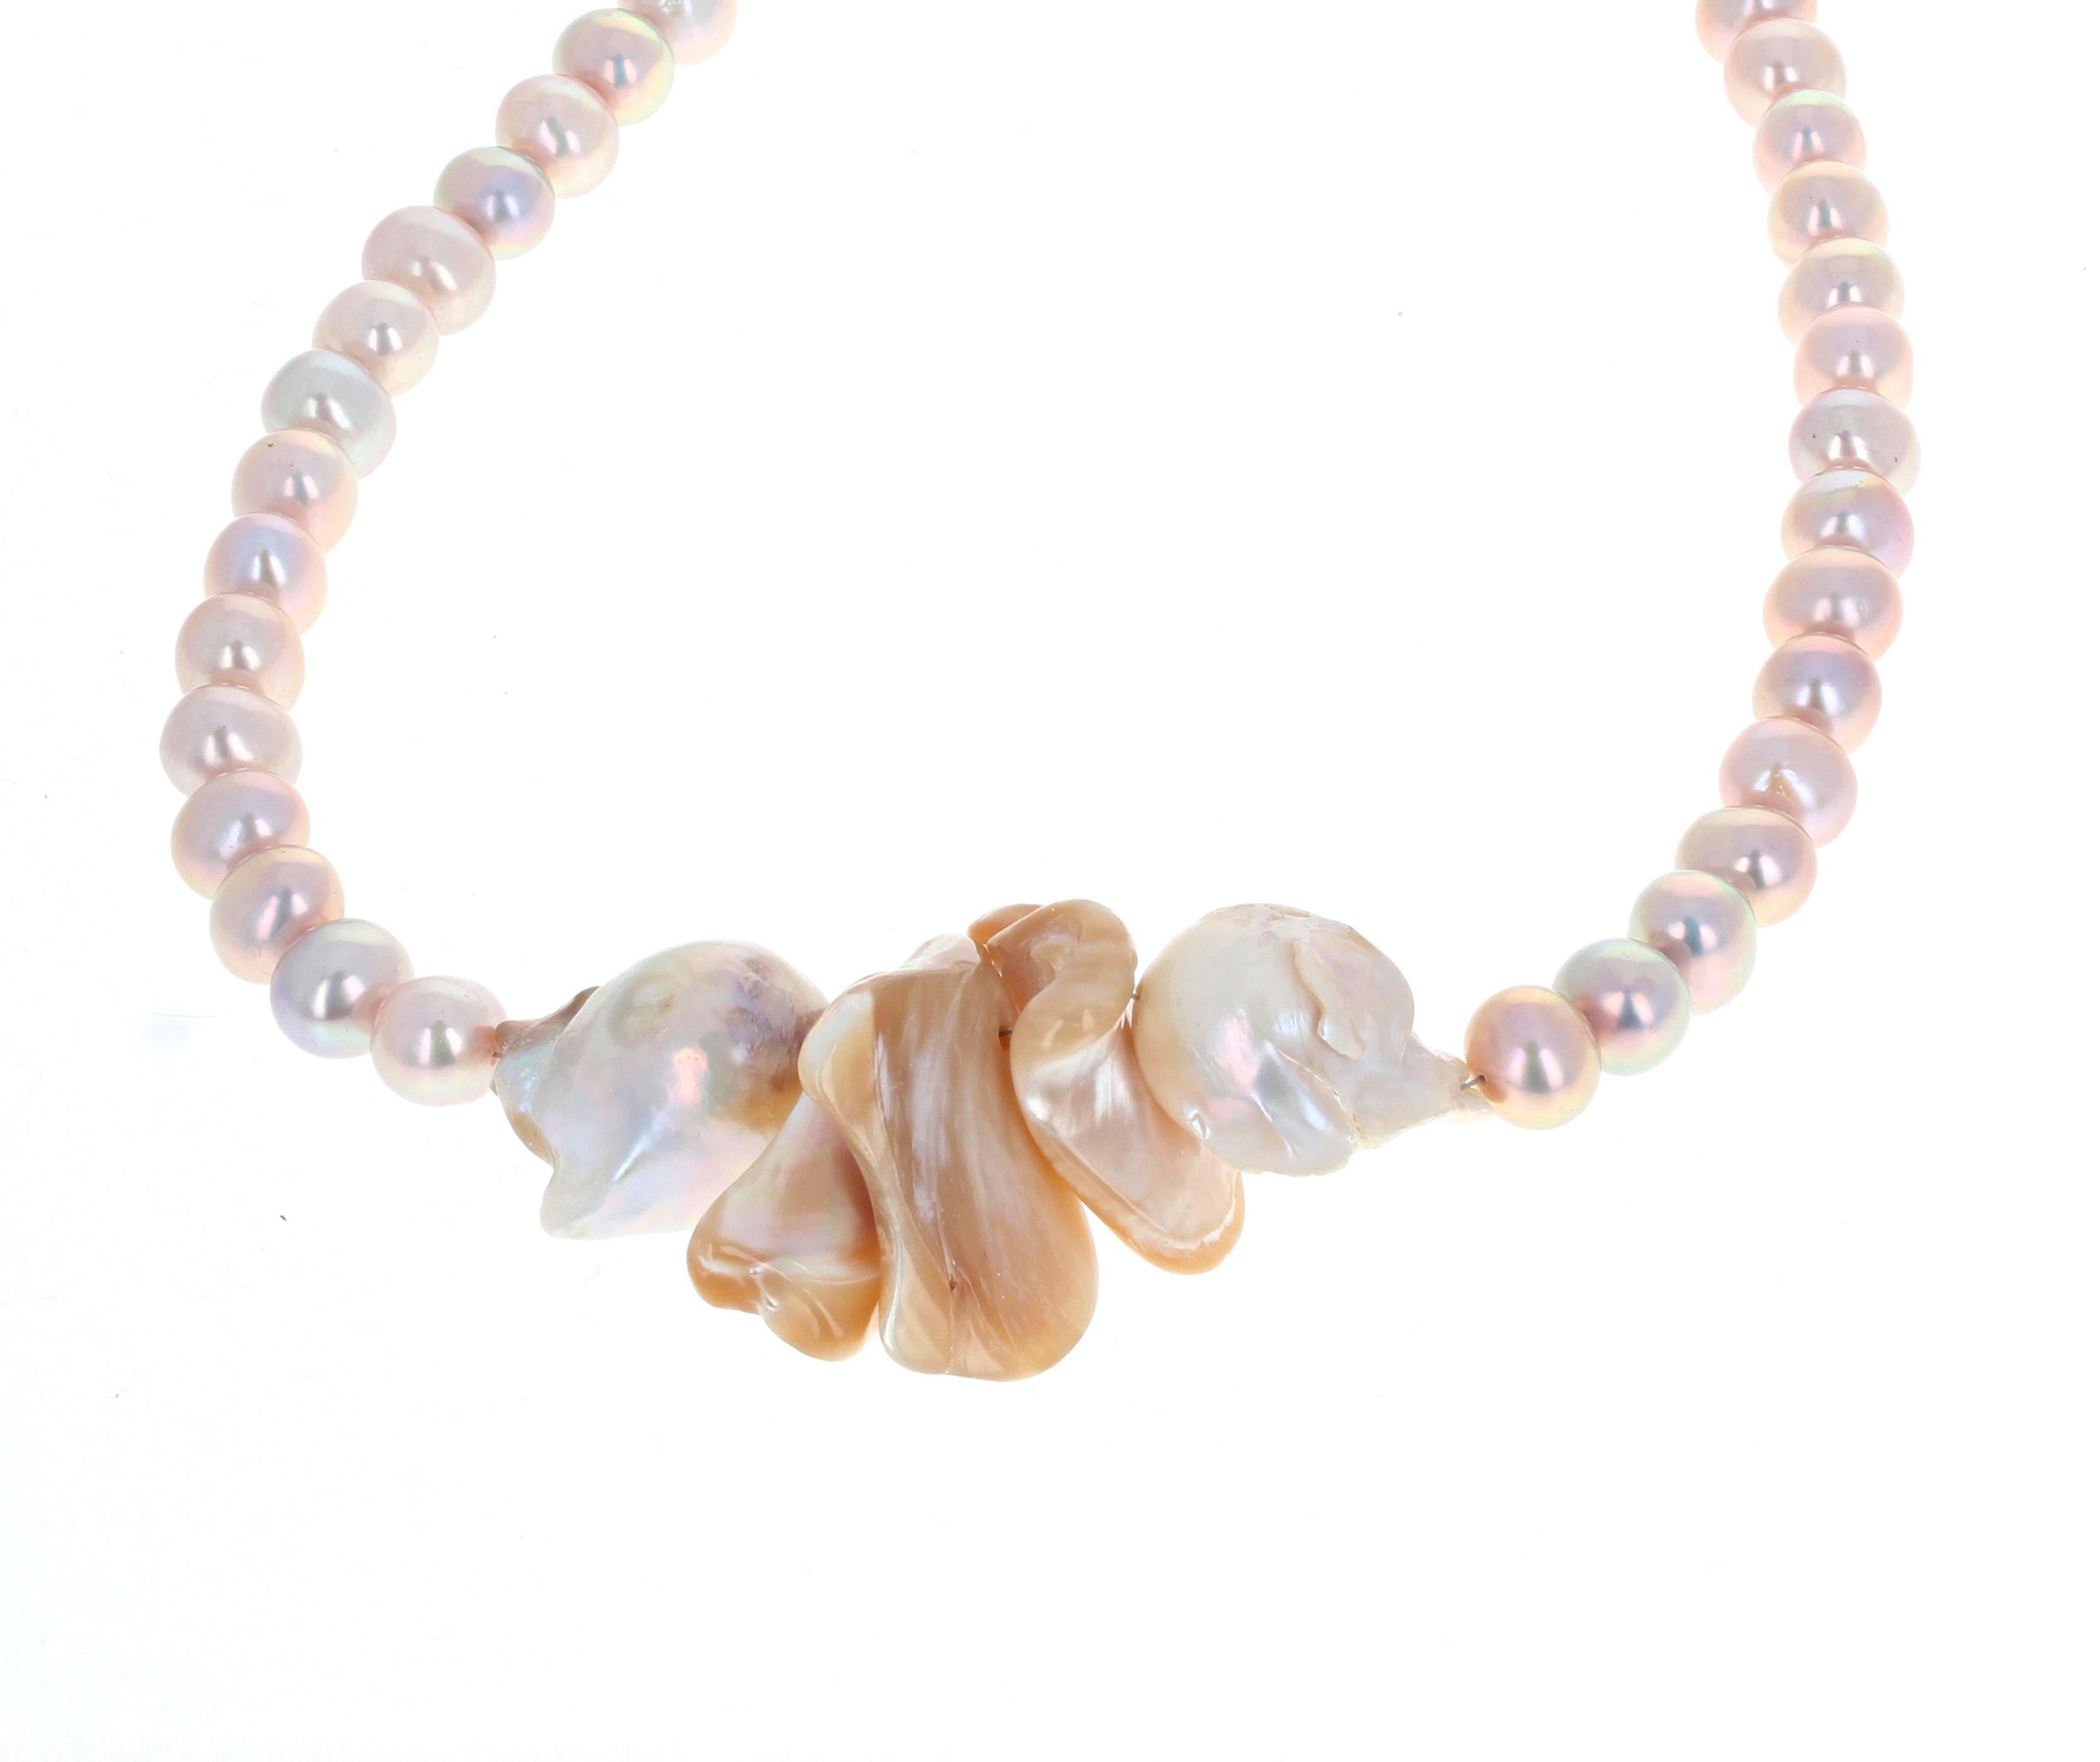 This different dramatic fascinating 20 inch necklace is enhanced by the large gold Pearl shells in the middle of the necklace.   The two large center Pearls are approximately 22mm long x 15mm round.  They are all real Pearls.  The silver clasp is an